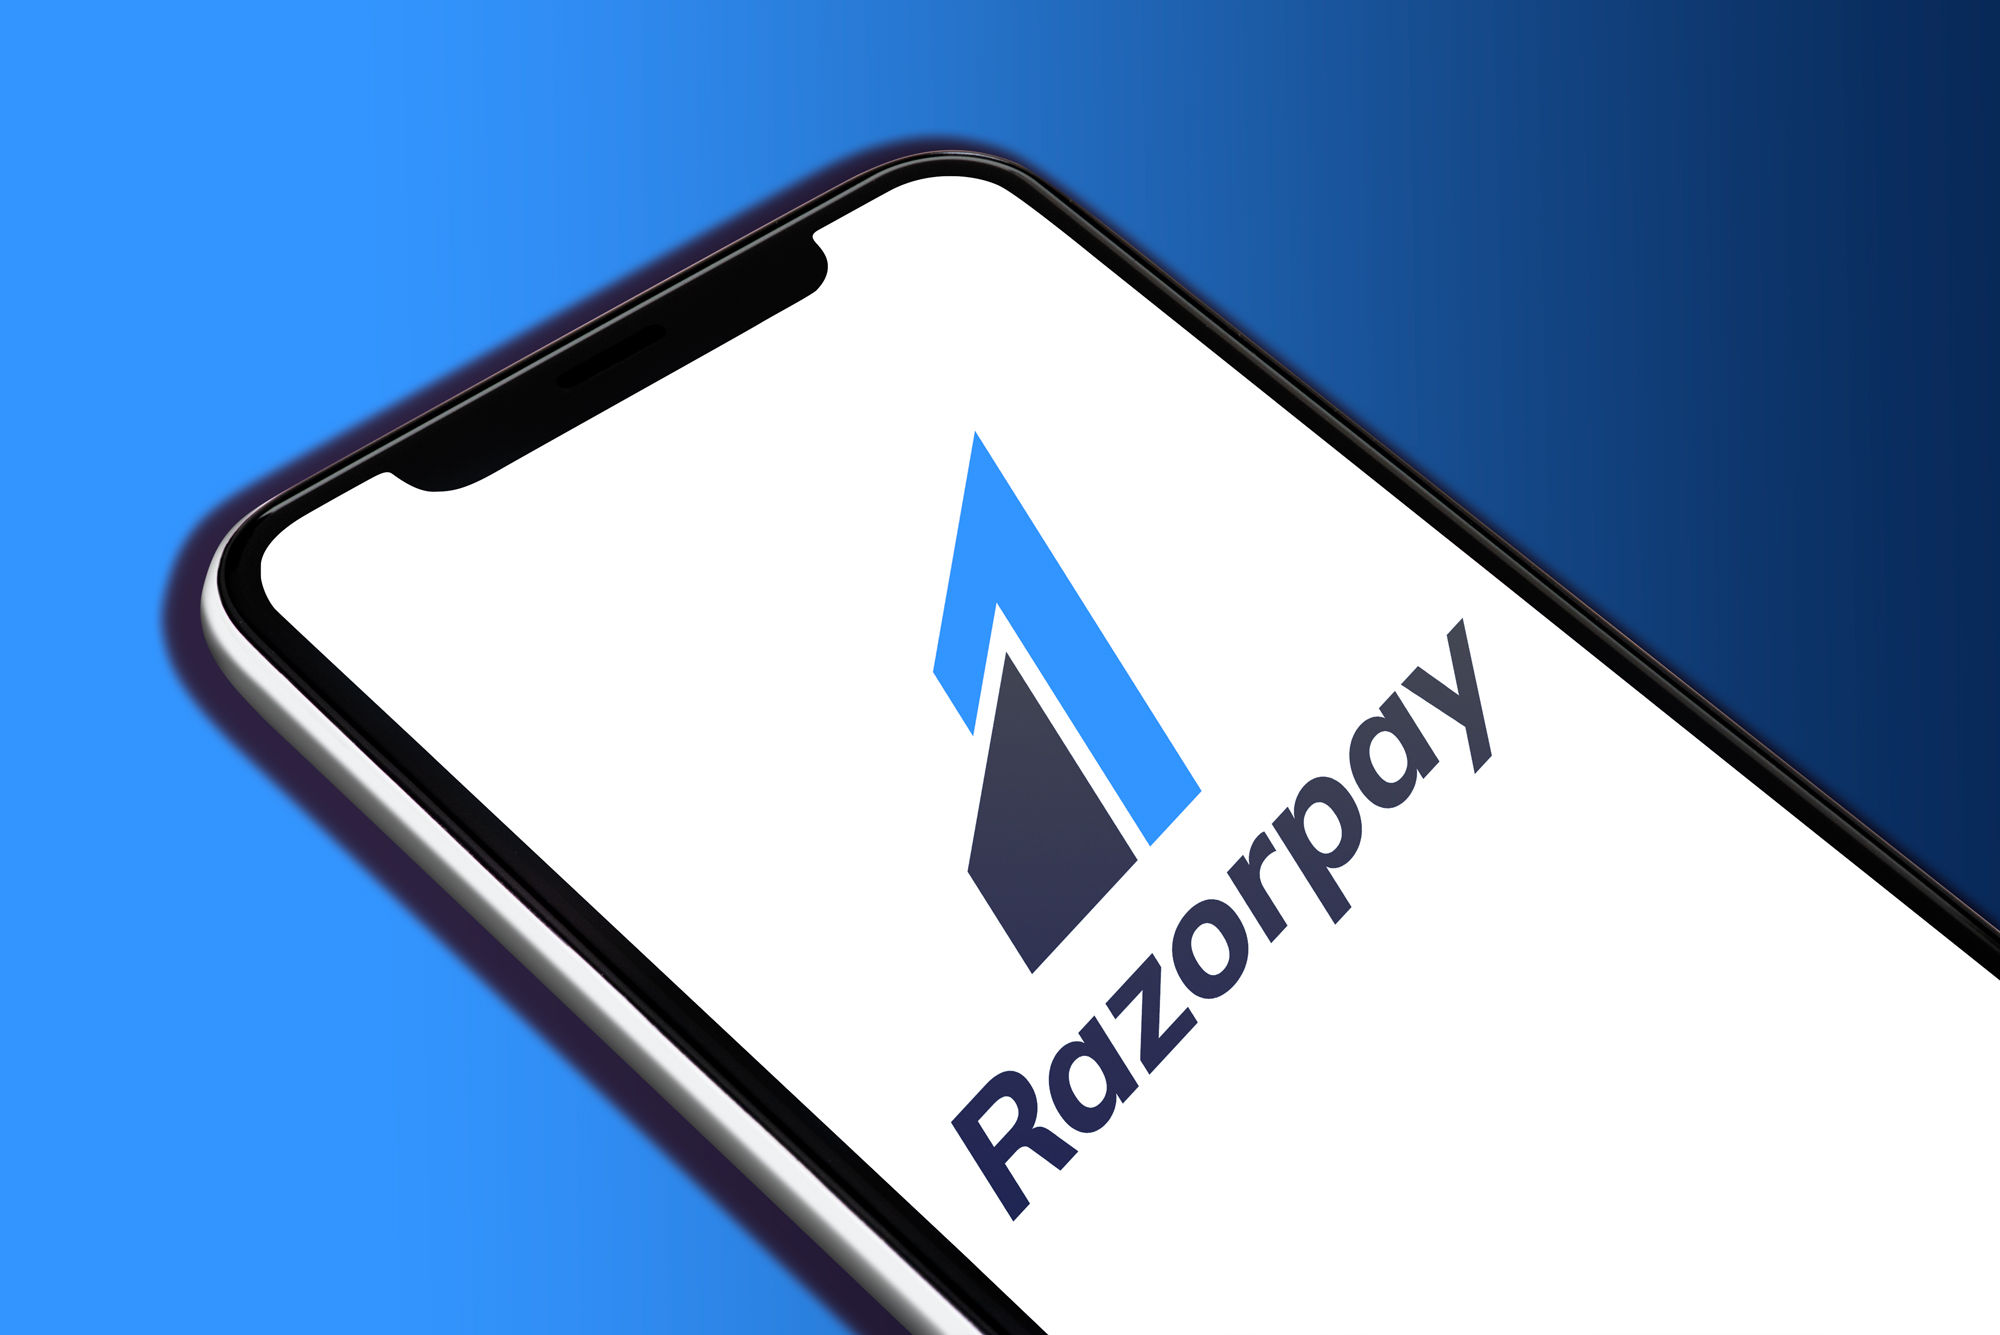 India's Leading Fintech Firm: Razorpay